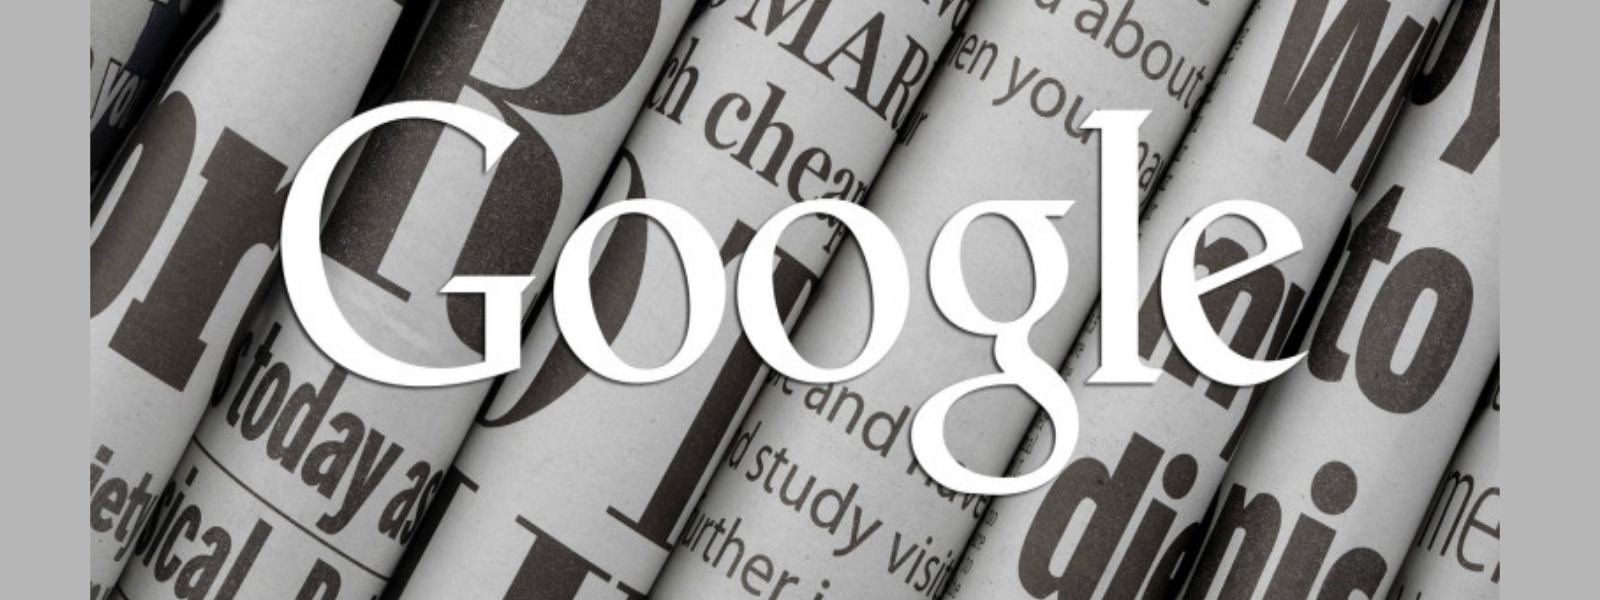 Google to invest $300m in 'quality news'